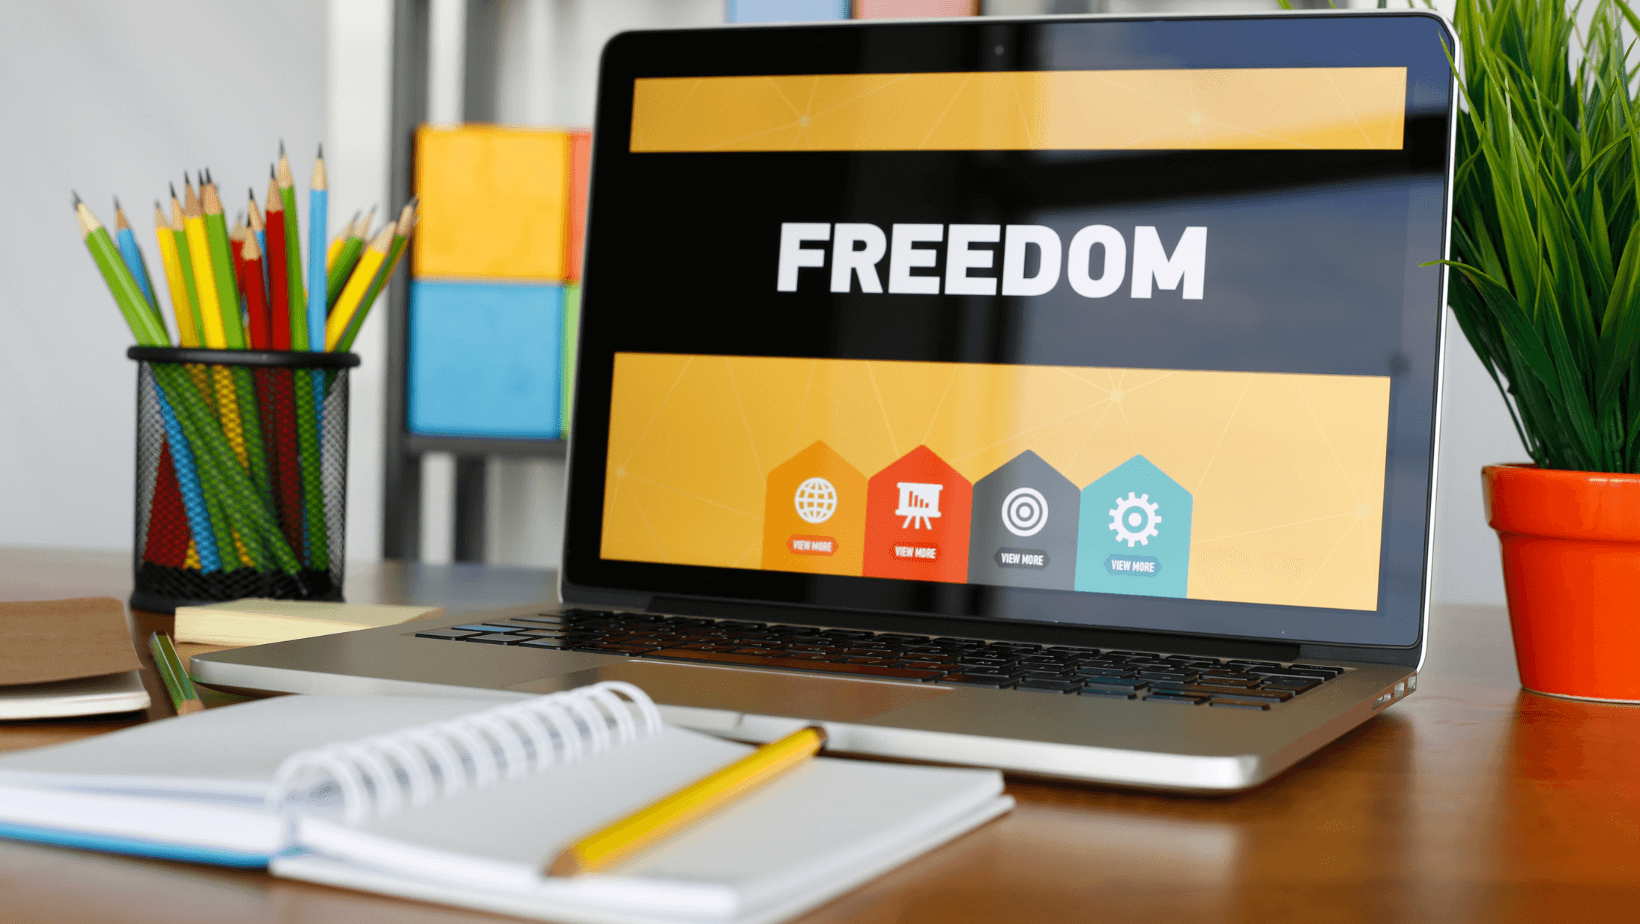 TIME FREEDOM - Take Back Your Time by Hiring a Virtual Assistant